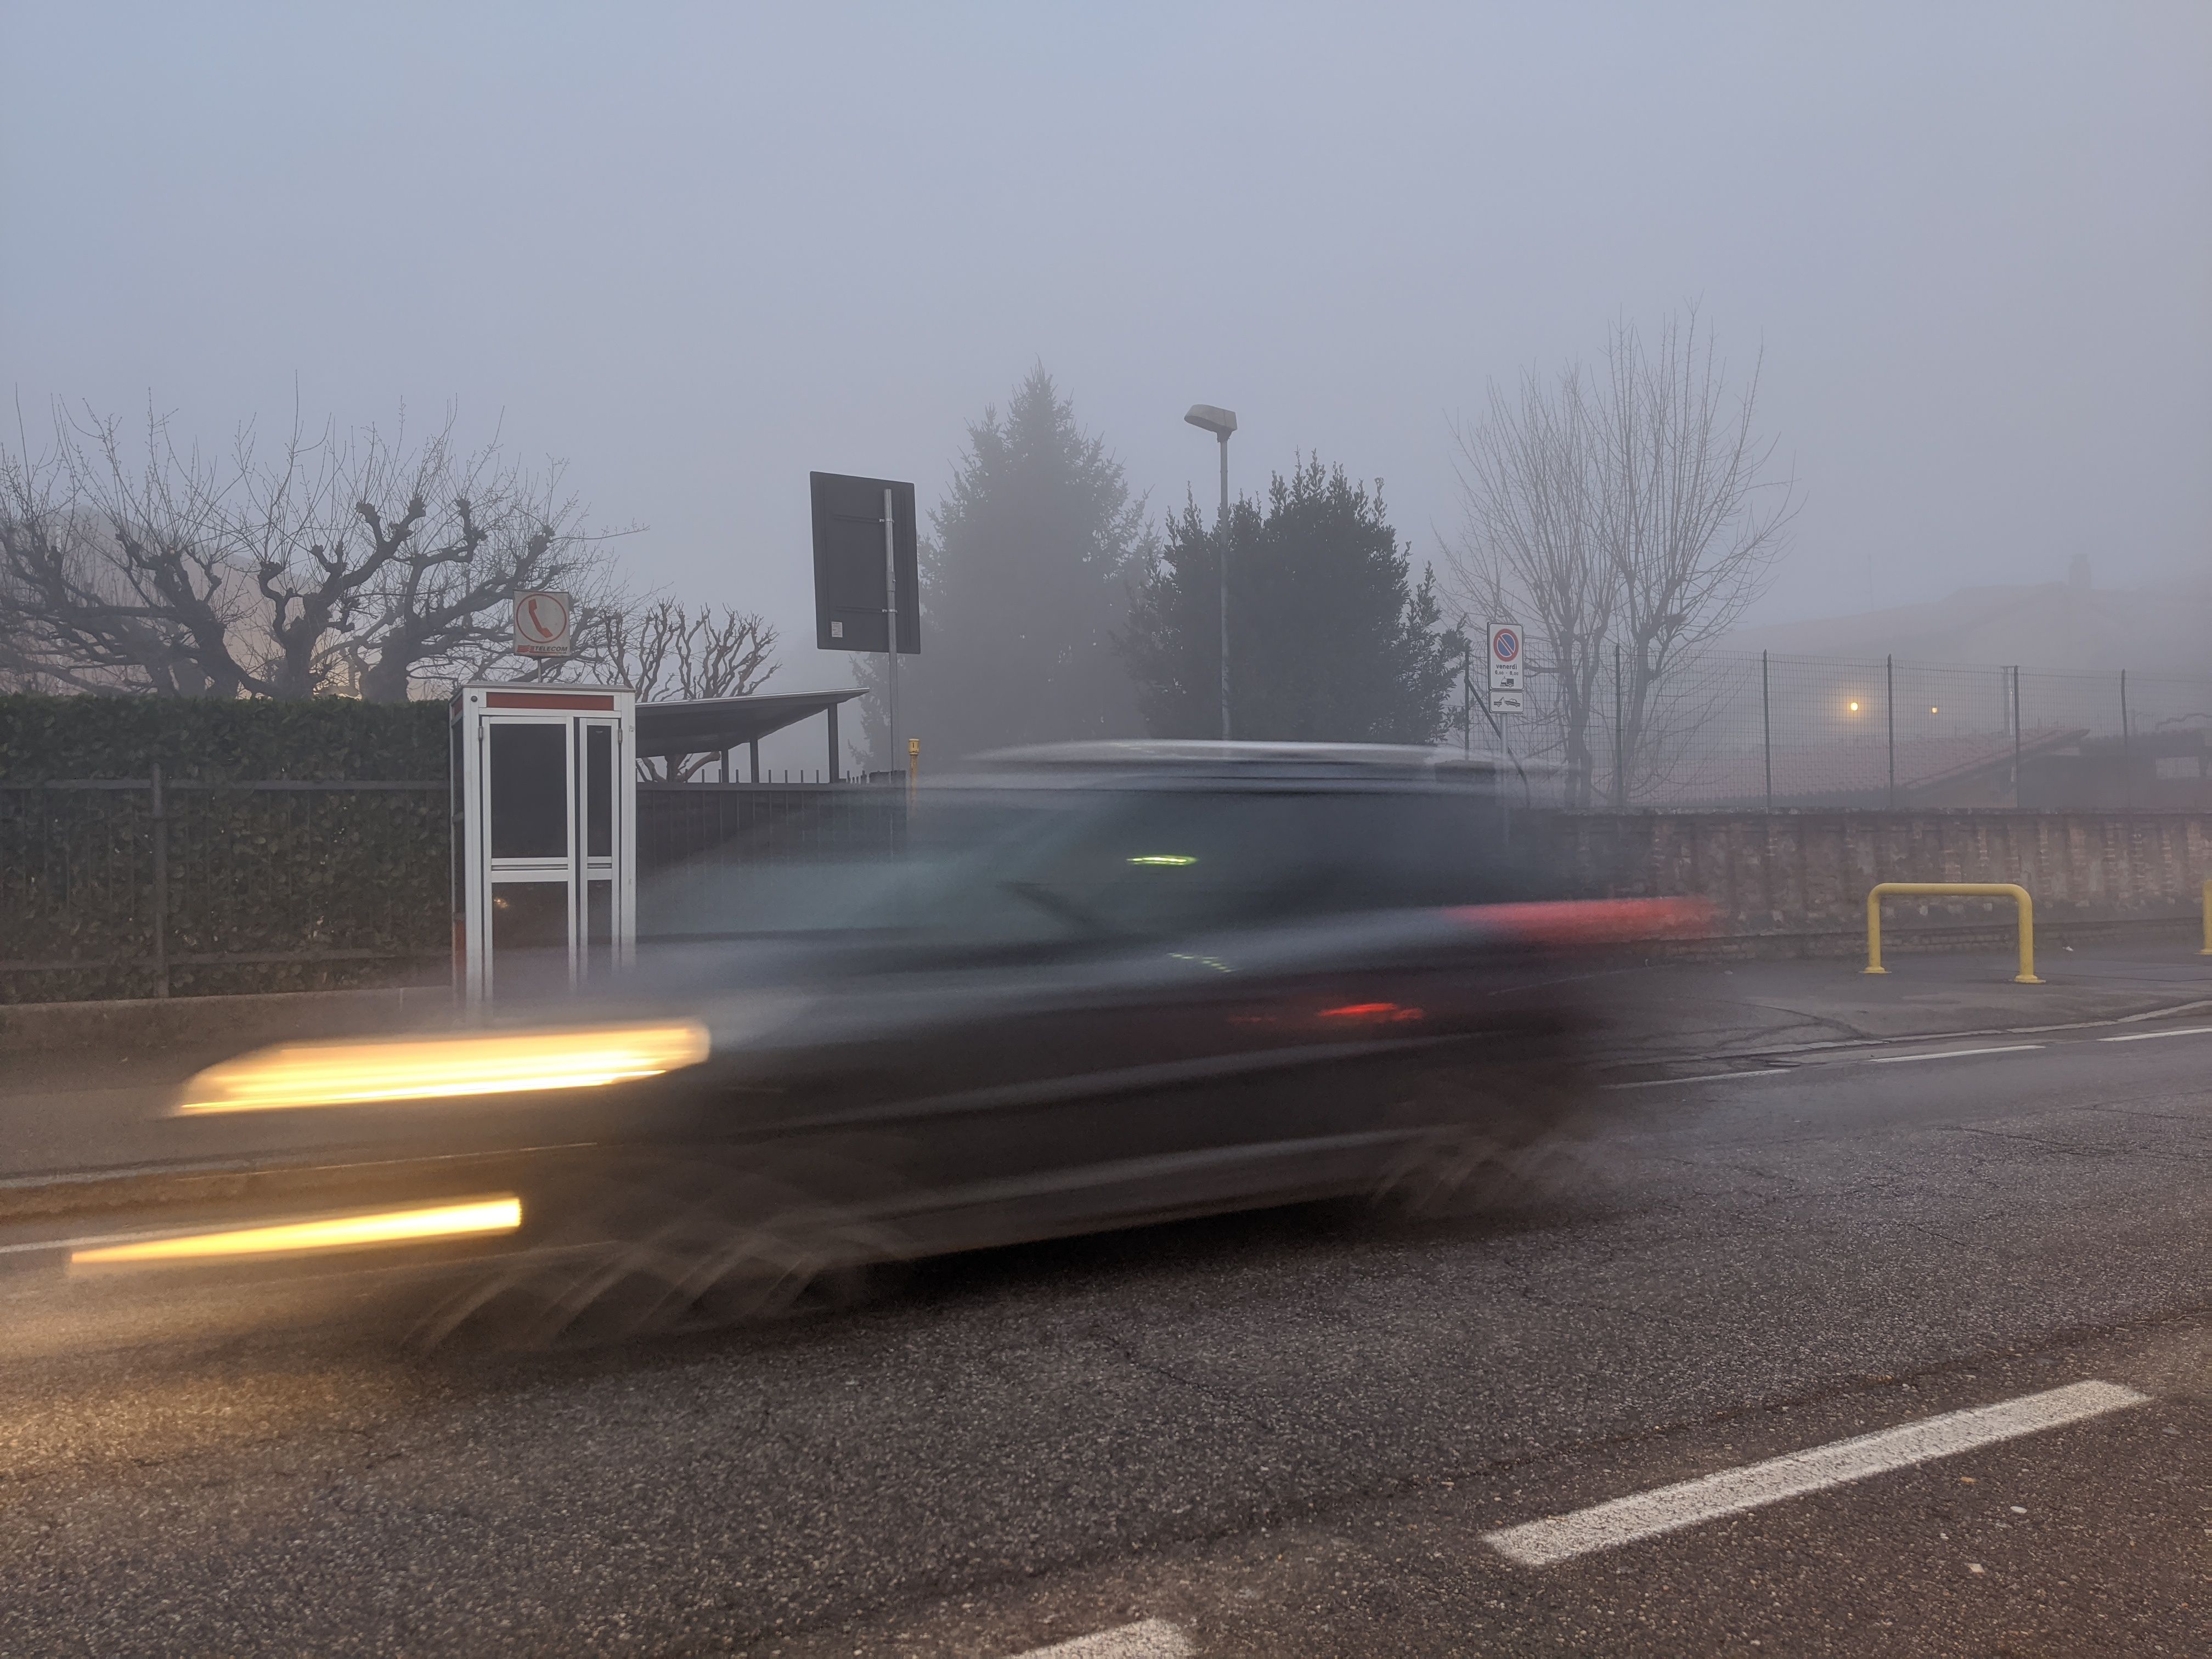 Picture of a car passing a street with fog